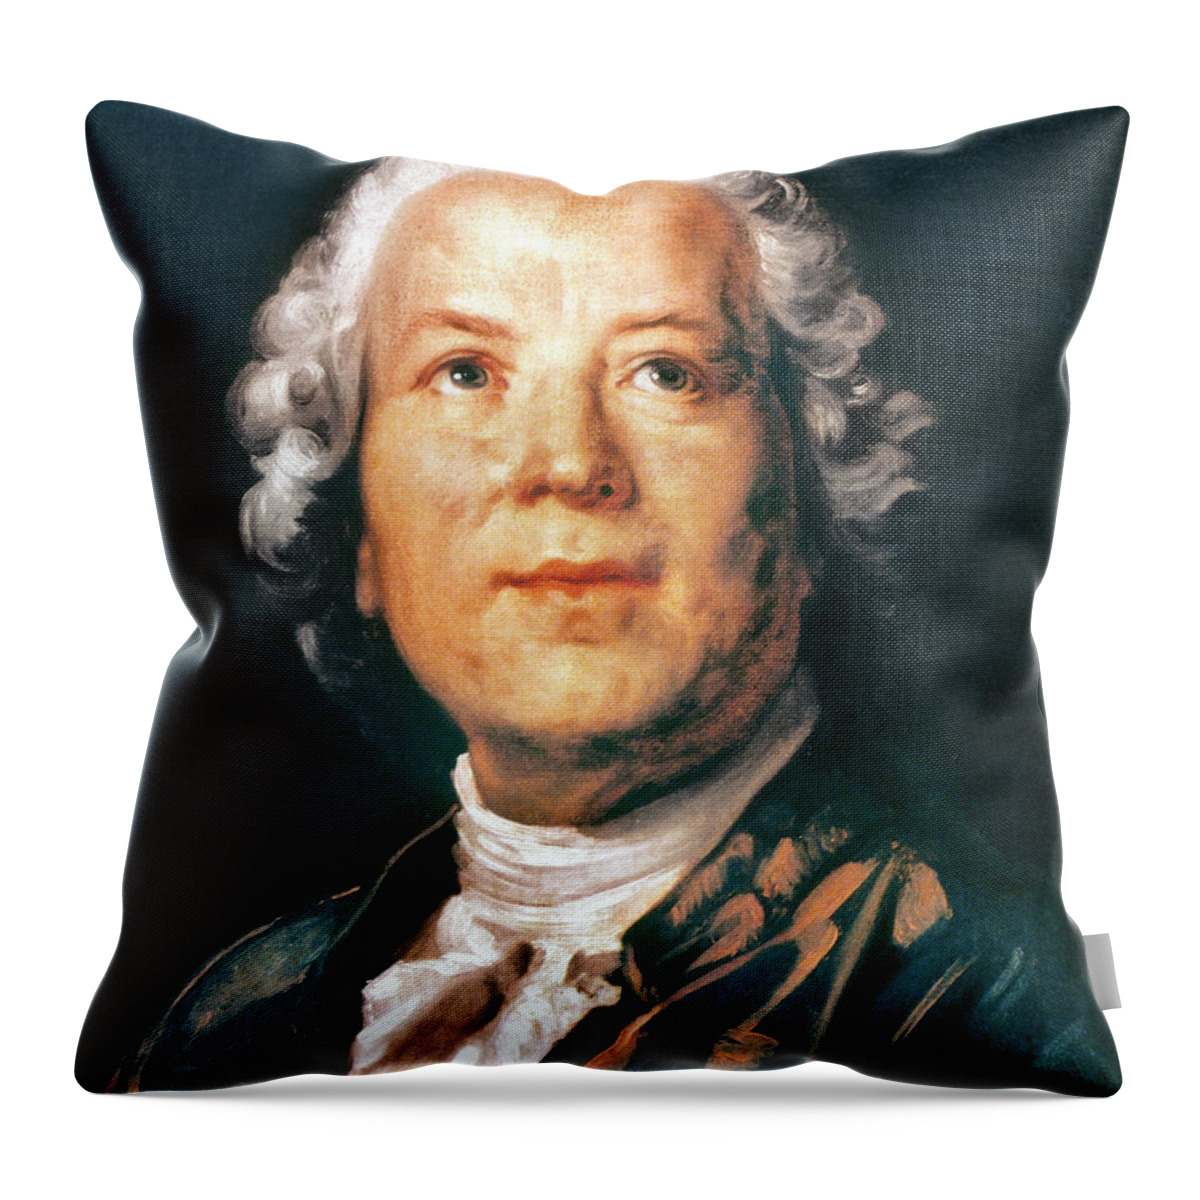 18th Century Throw Pillow featuring the photograph Christoph Willibald Gluck by Granger